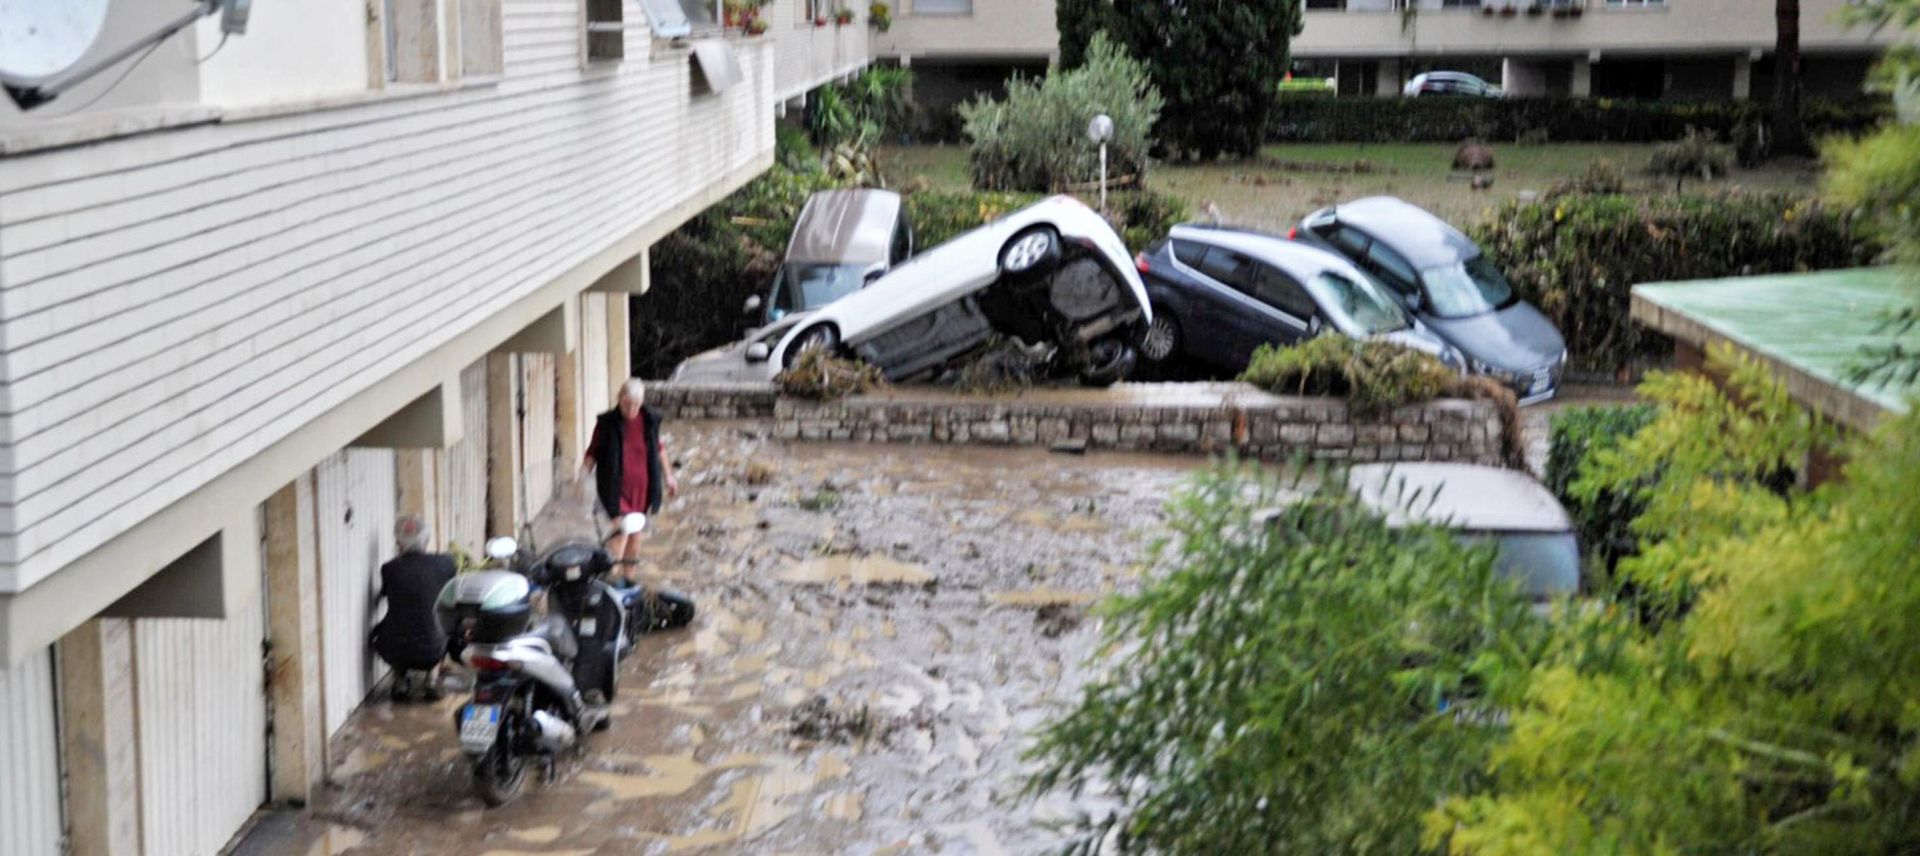 epa06195737 Cars that were taken with by floods sit in a ground floor in Livorno, Italy, 10 September 2017. According to reports, five people were found dead in a flooded basement after abundant rain.  EPA/ALESSIO NOVI BEST QUALITY AVAILABLE